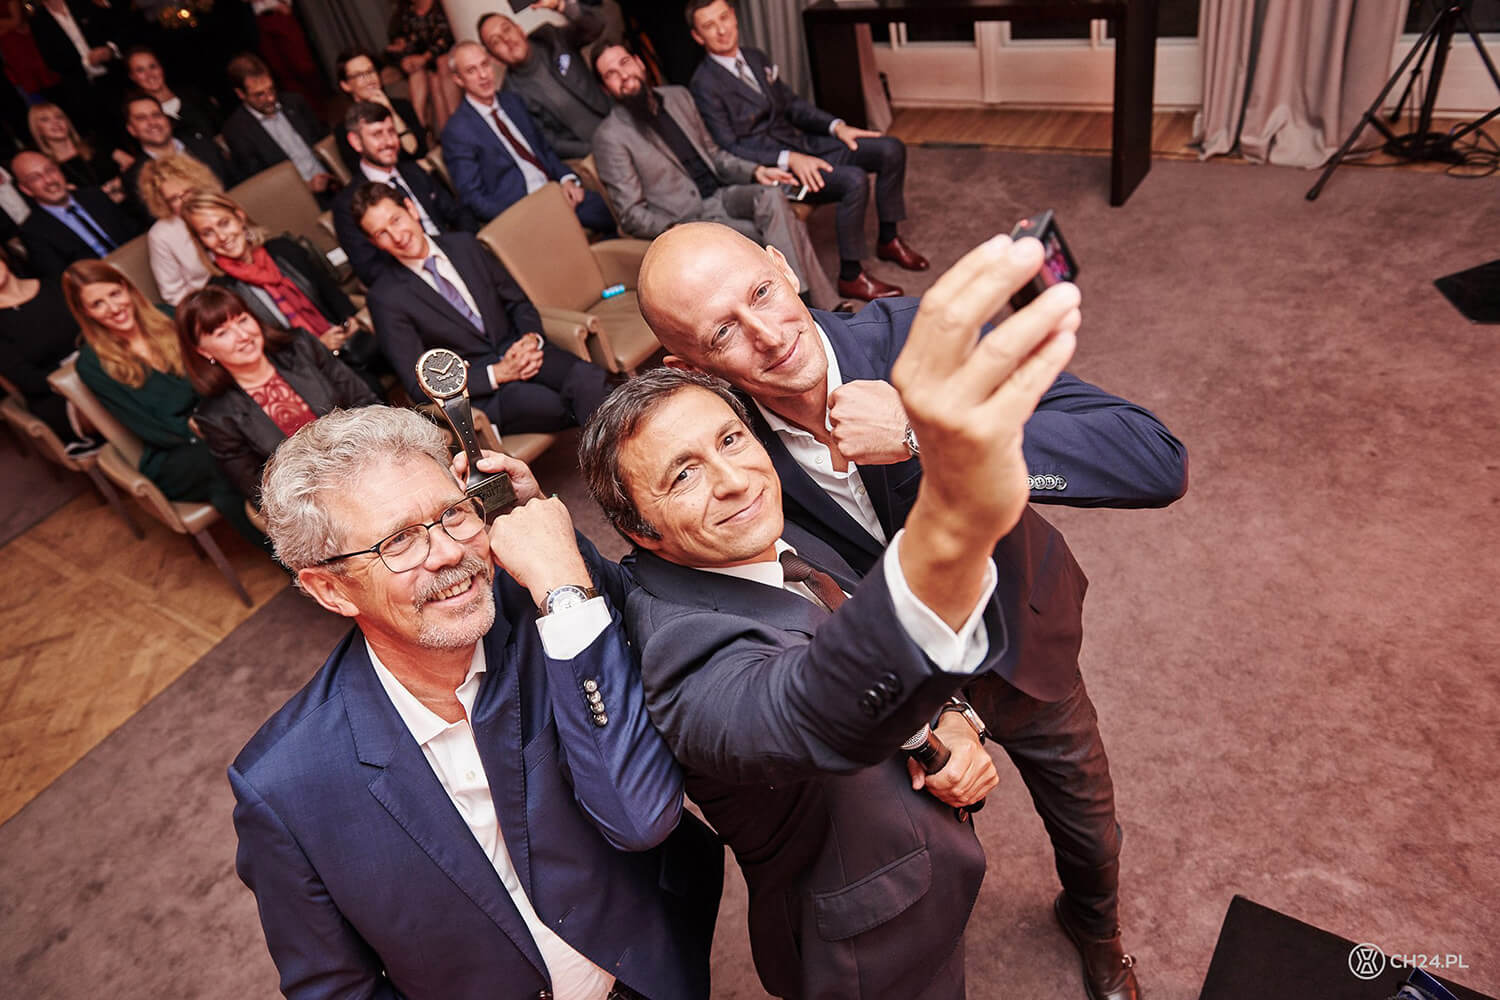 The 'Seabra Selfie' with (L-R) Jean-Marc Wiederrecht (Agenhor), Miguel Seabra (Espiral do Tempo/jury member), Marco Borraccino (Singer Reimagined) at the 2017 WOTY awards by CH24.PL (photo courtesy Marcin Klaban/CH24.PL)